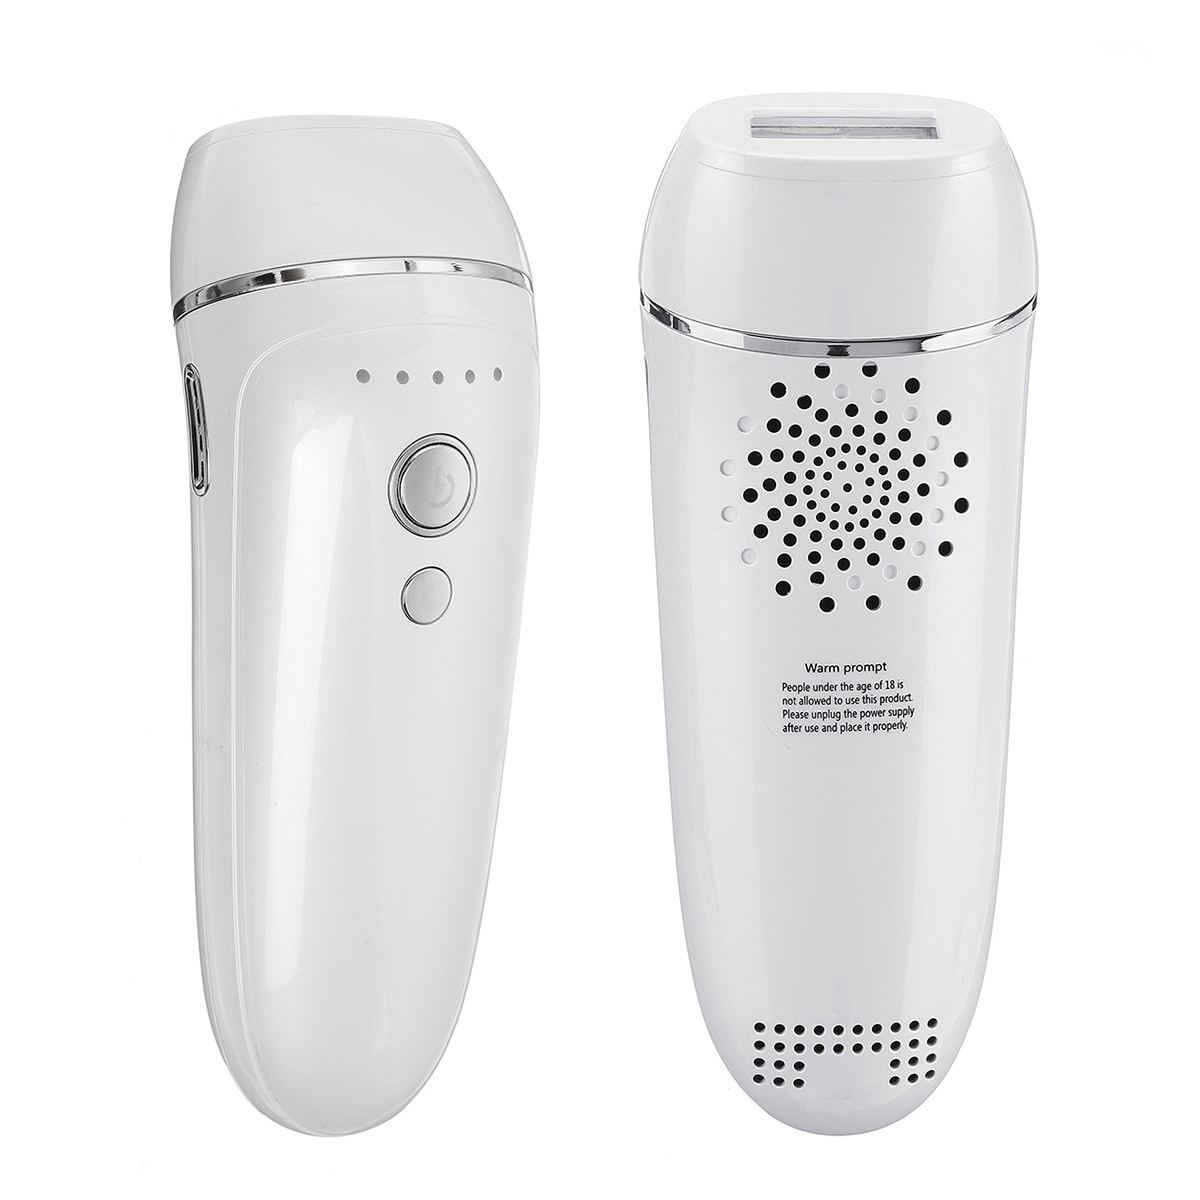 

200,0000 Flashes IPL Hair Removal Laser Hair Removal Permanent for The Whole Body Painless Facial Hair Remover Epilator with a Google and a Razor